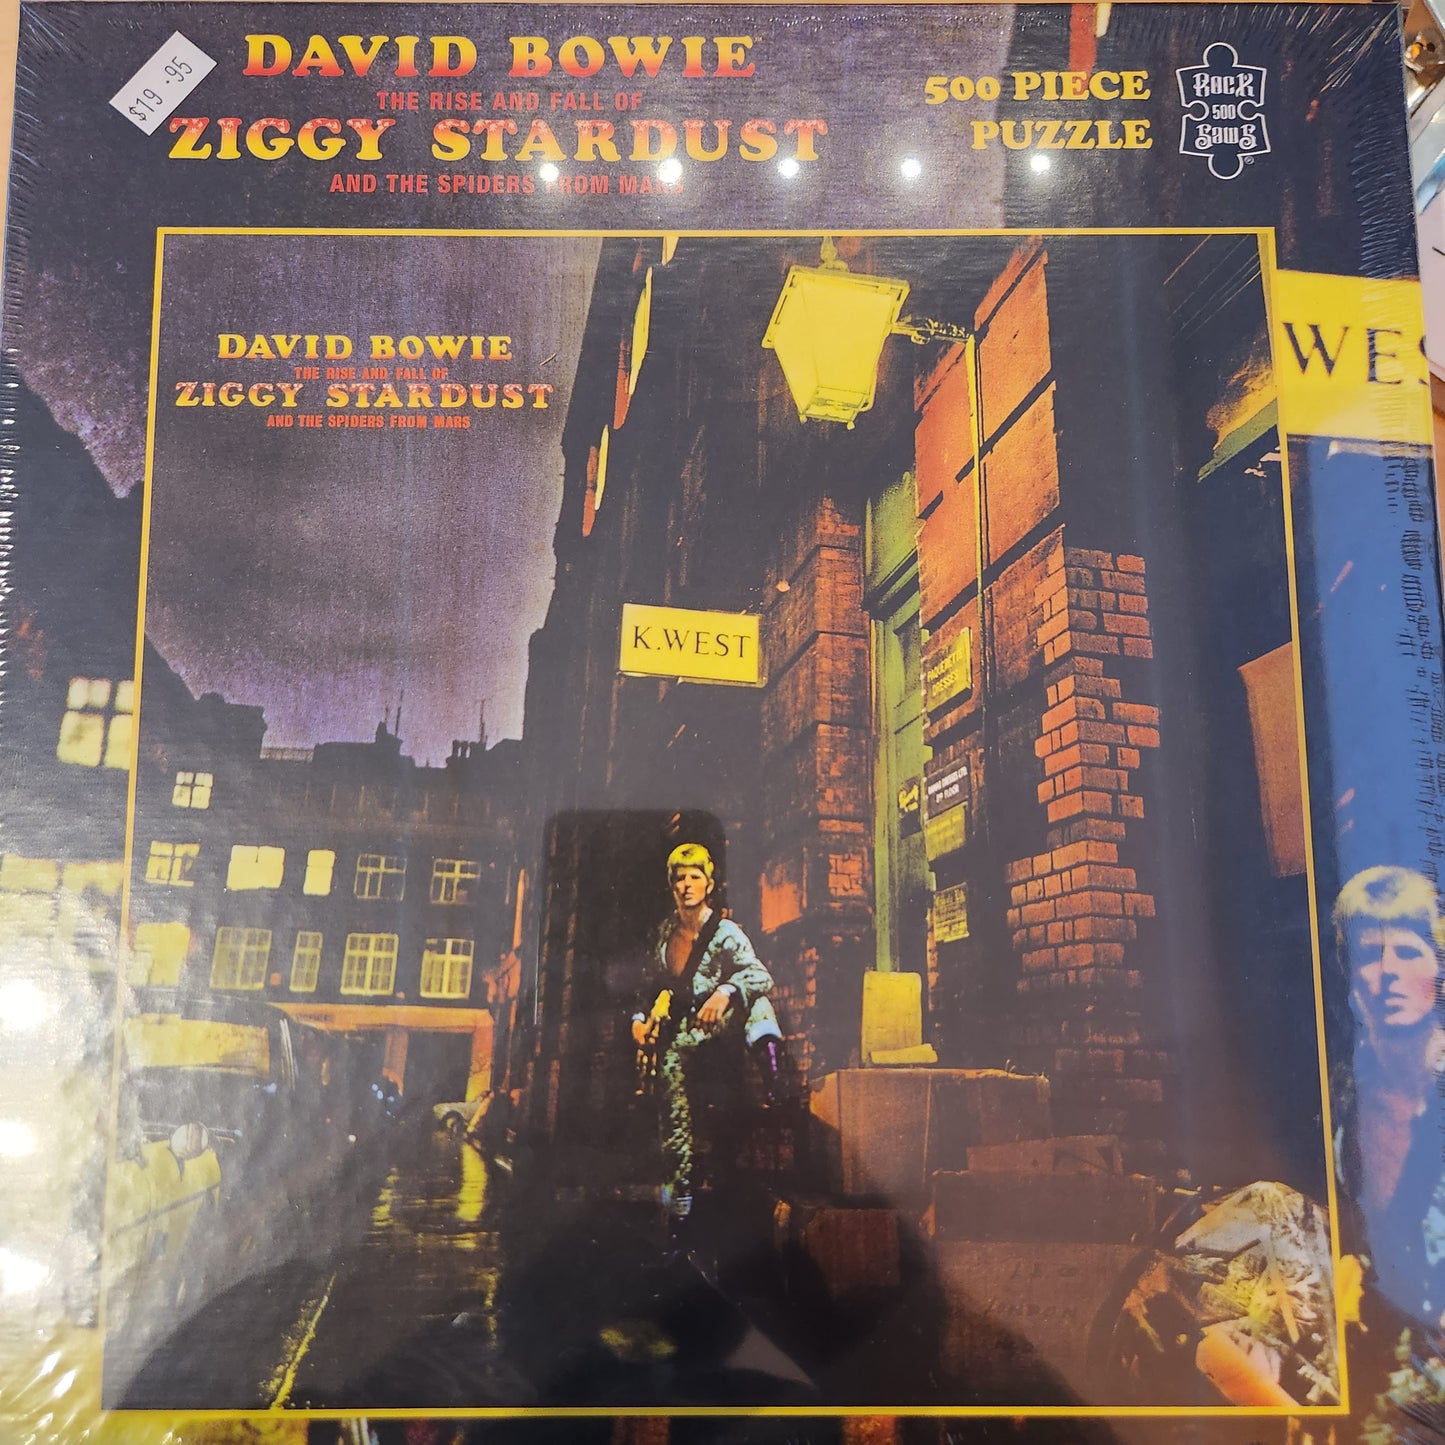 Rise and fall of Ziggy Stardust